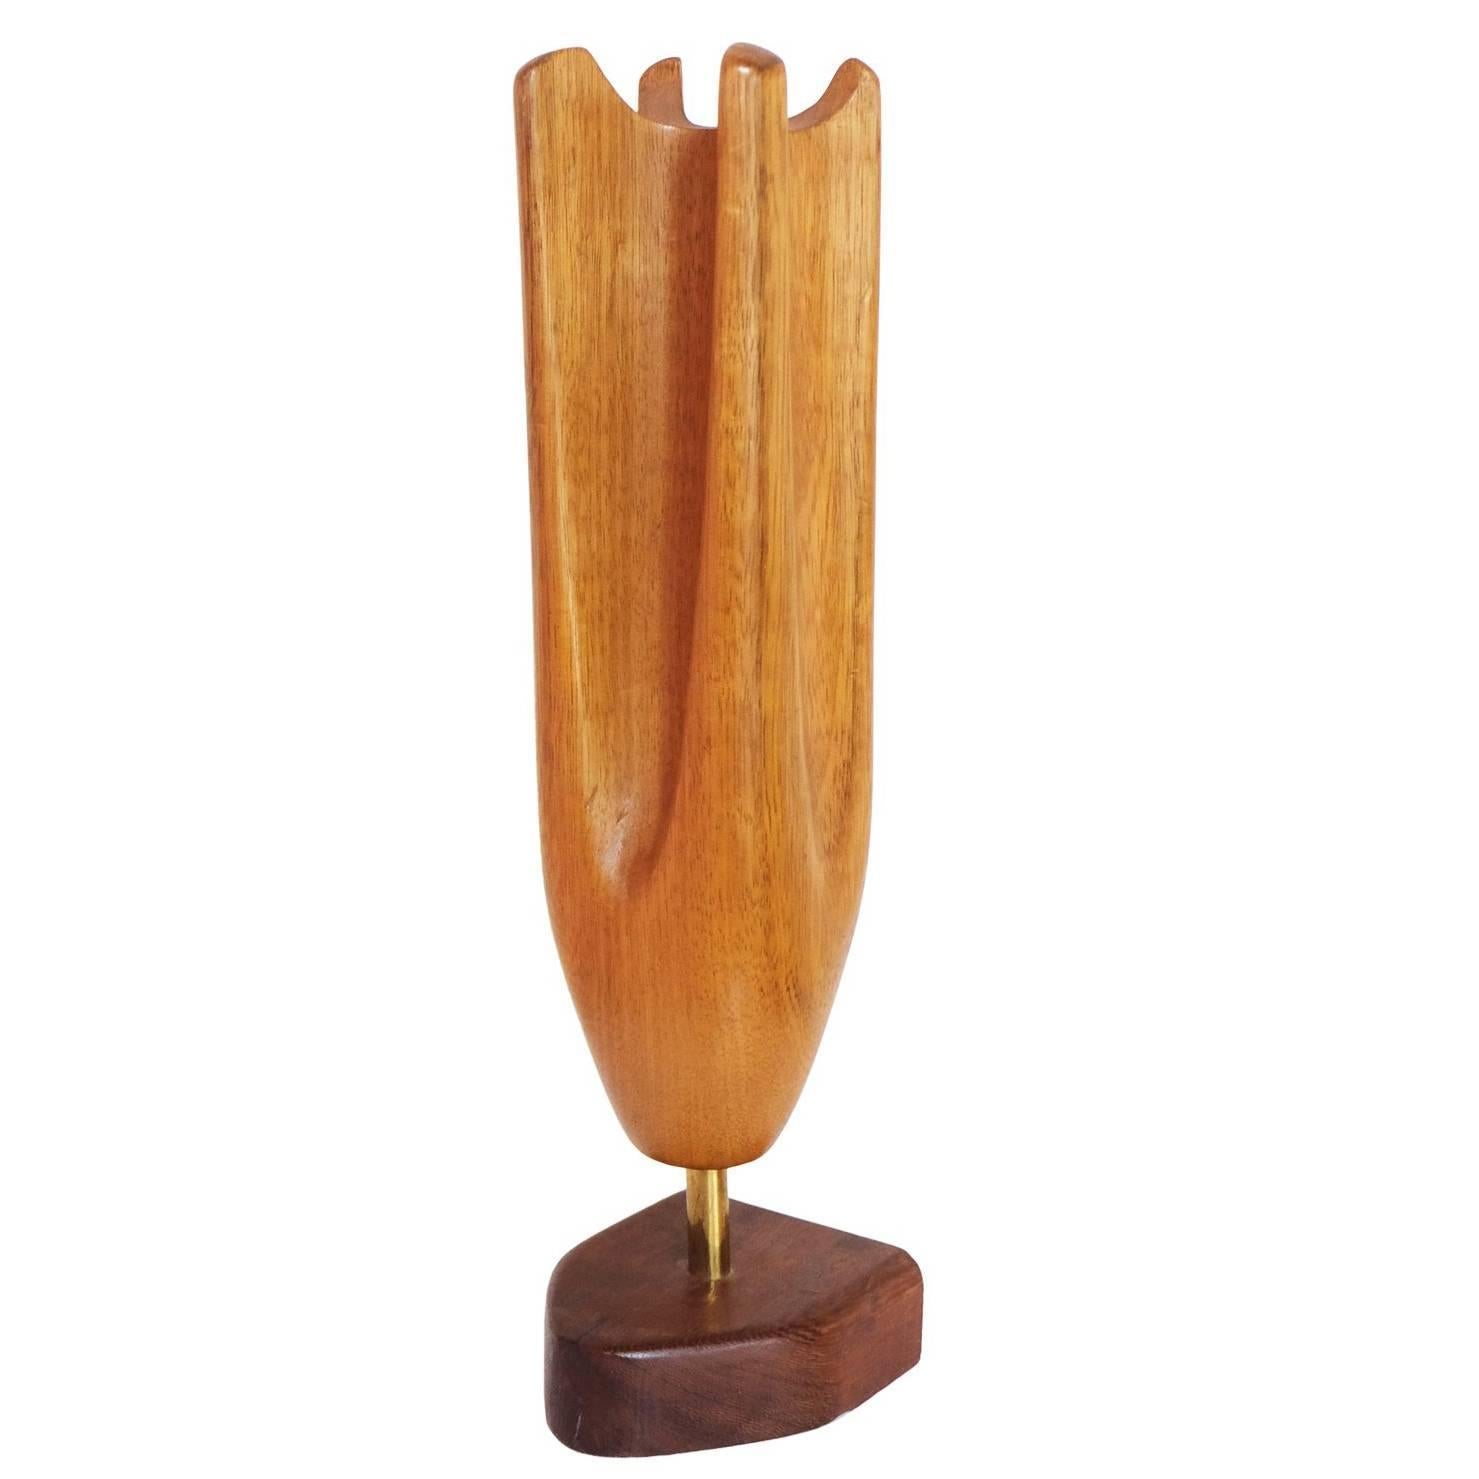 British 1960s Sycamore Walnut and Brass Abstract Wooden Sculpture For Sale